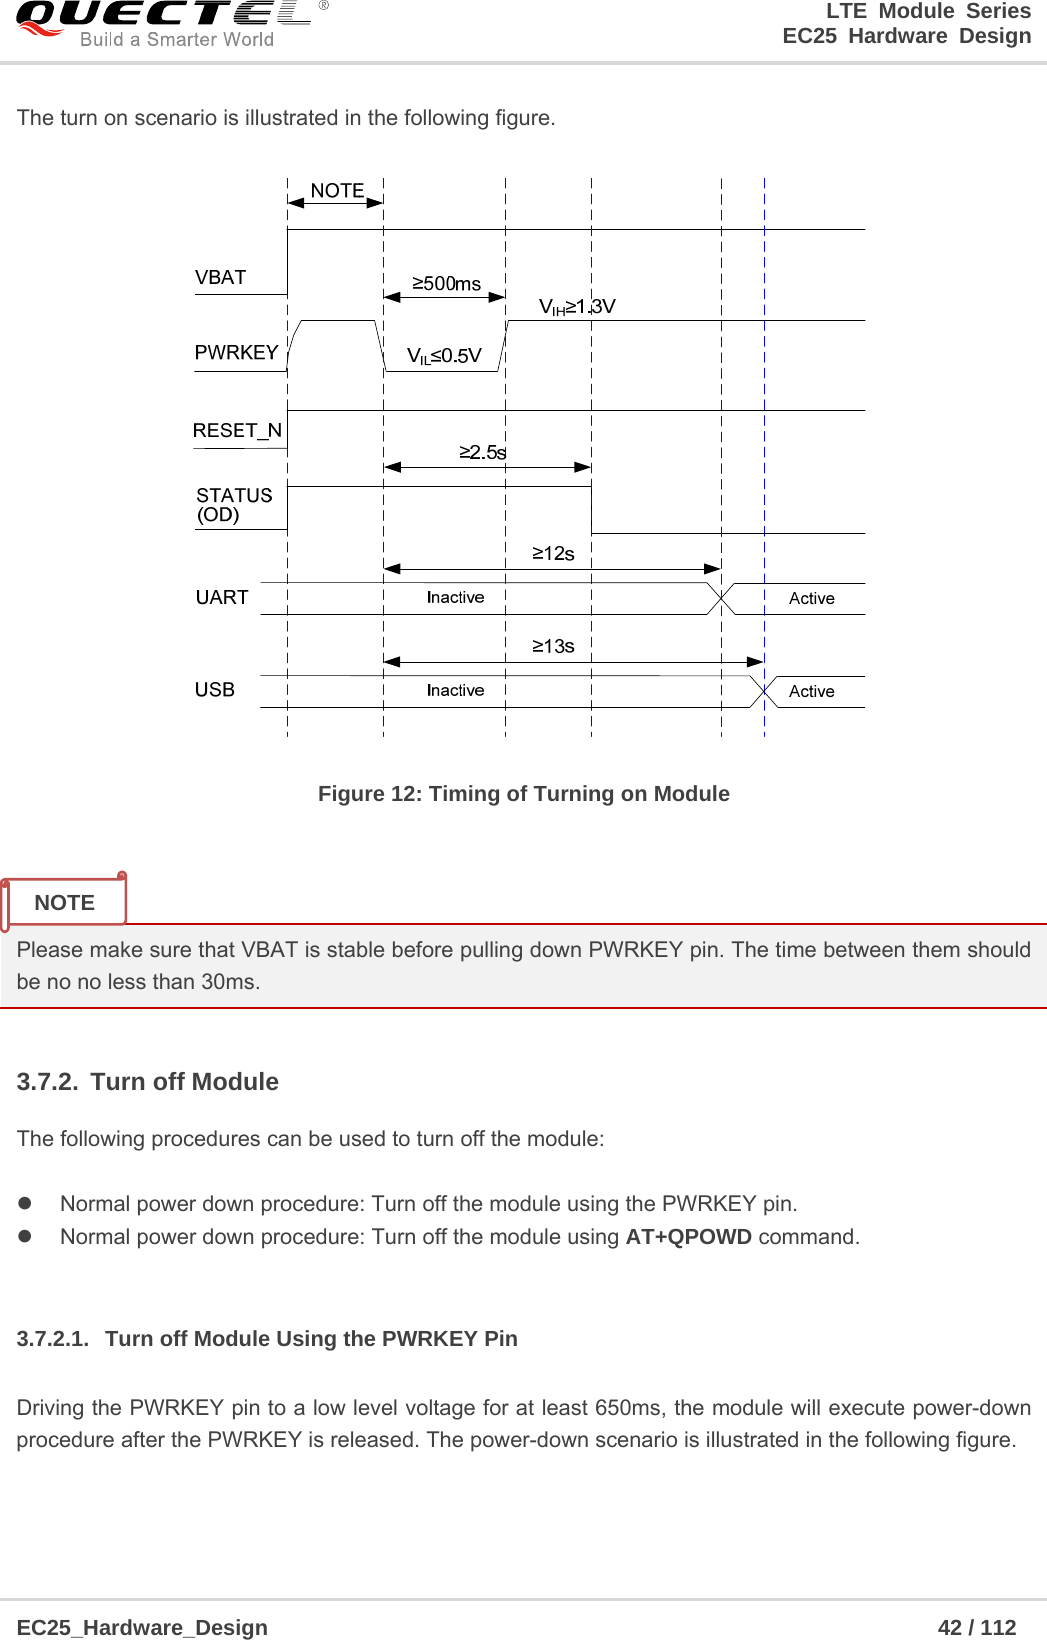 LTE Module Series                                                  EC25 Hardware Design  EC25_Hardware_Design                                                             42 / 112    The turn on scenario is illustrated in the following figure.  Figure 12: Timing of Turning on Module   Please make sure that VBAT is stable before pulling down PWRKEY pin. The time between them should be no no less than 30ms.  3.7.2. Turn off Module The following procedures can be used to turn off the module:    Normal power down procedure: Turn off the module using the PWRKEY pin.   Normal power down procedure: Turn off the module using AT+QPOWD command.  3.7.2.1.  Turn off Module Using the PWRKEY Pin Driving the PWRKEY pin to a low level voltage for at least 650ms, the module will execute power-down procedure after the PWRKEY is released. The power-down scenario is illustrated in the following figure. NOTE 